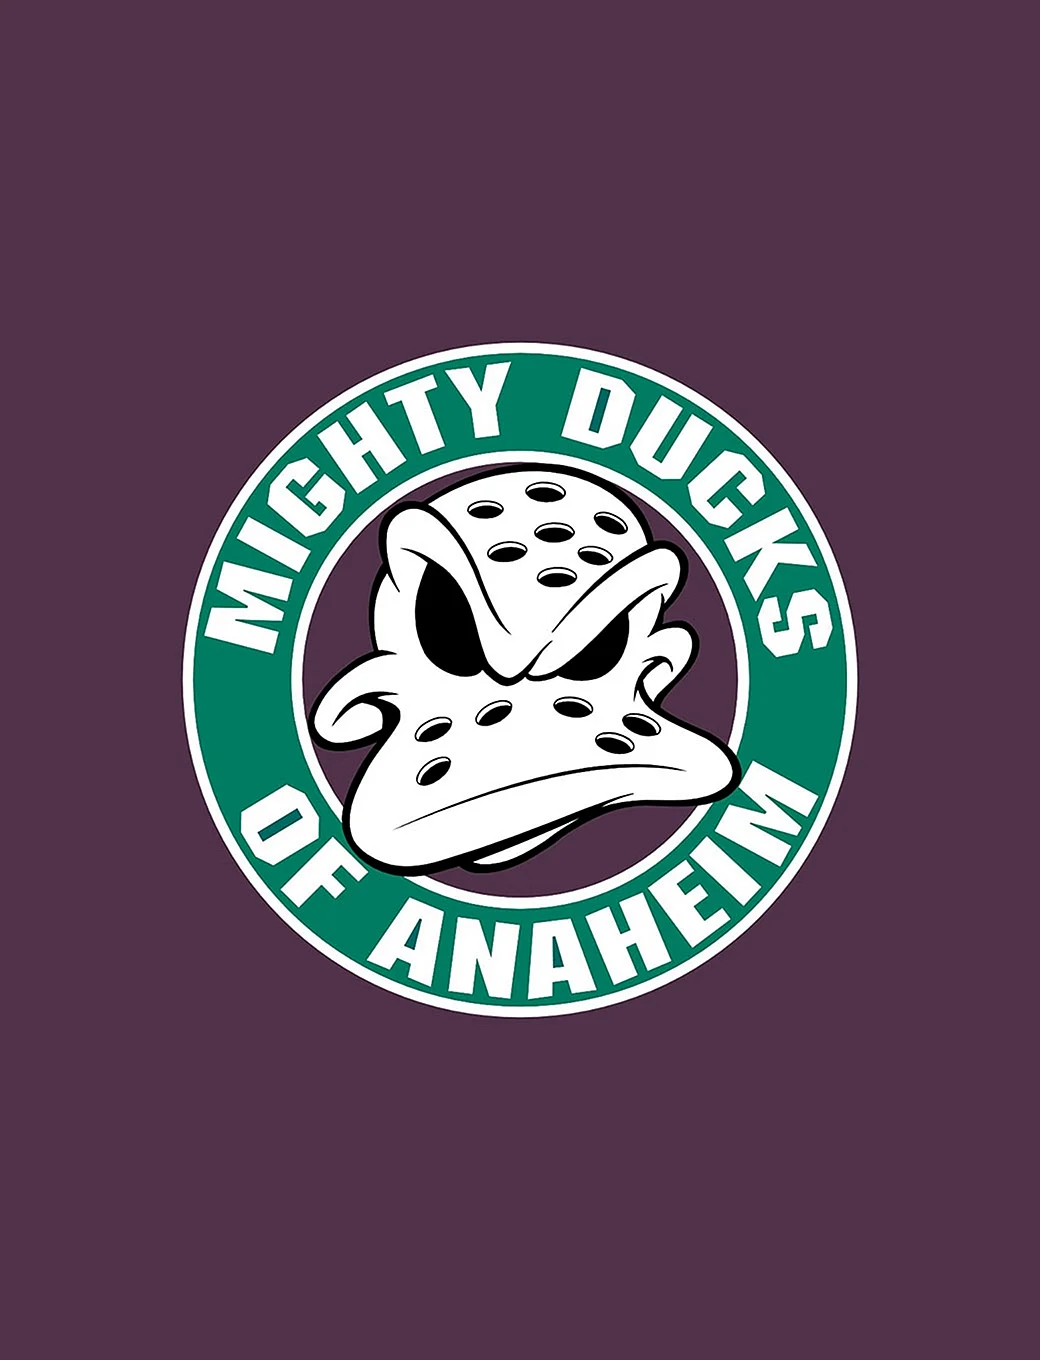 Mighty Ducks Wallpaper For iPhone